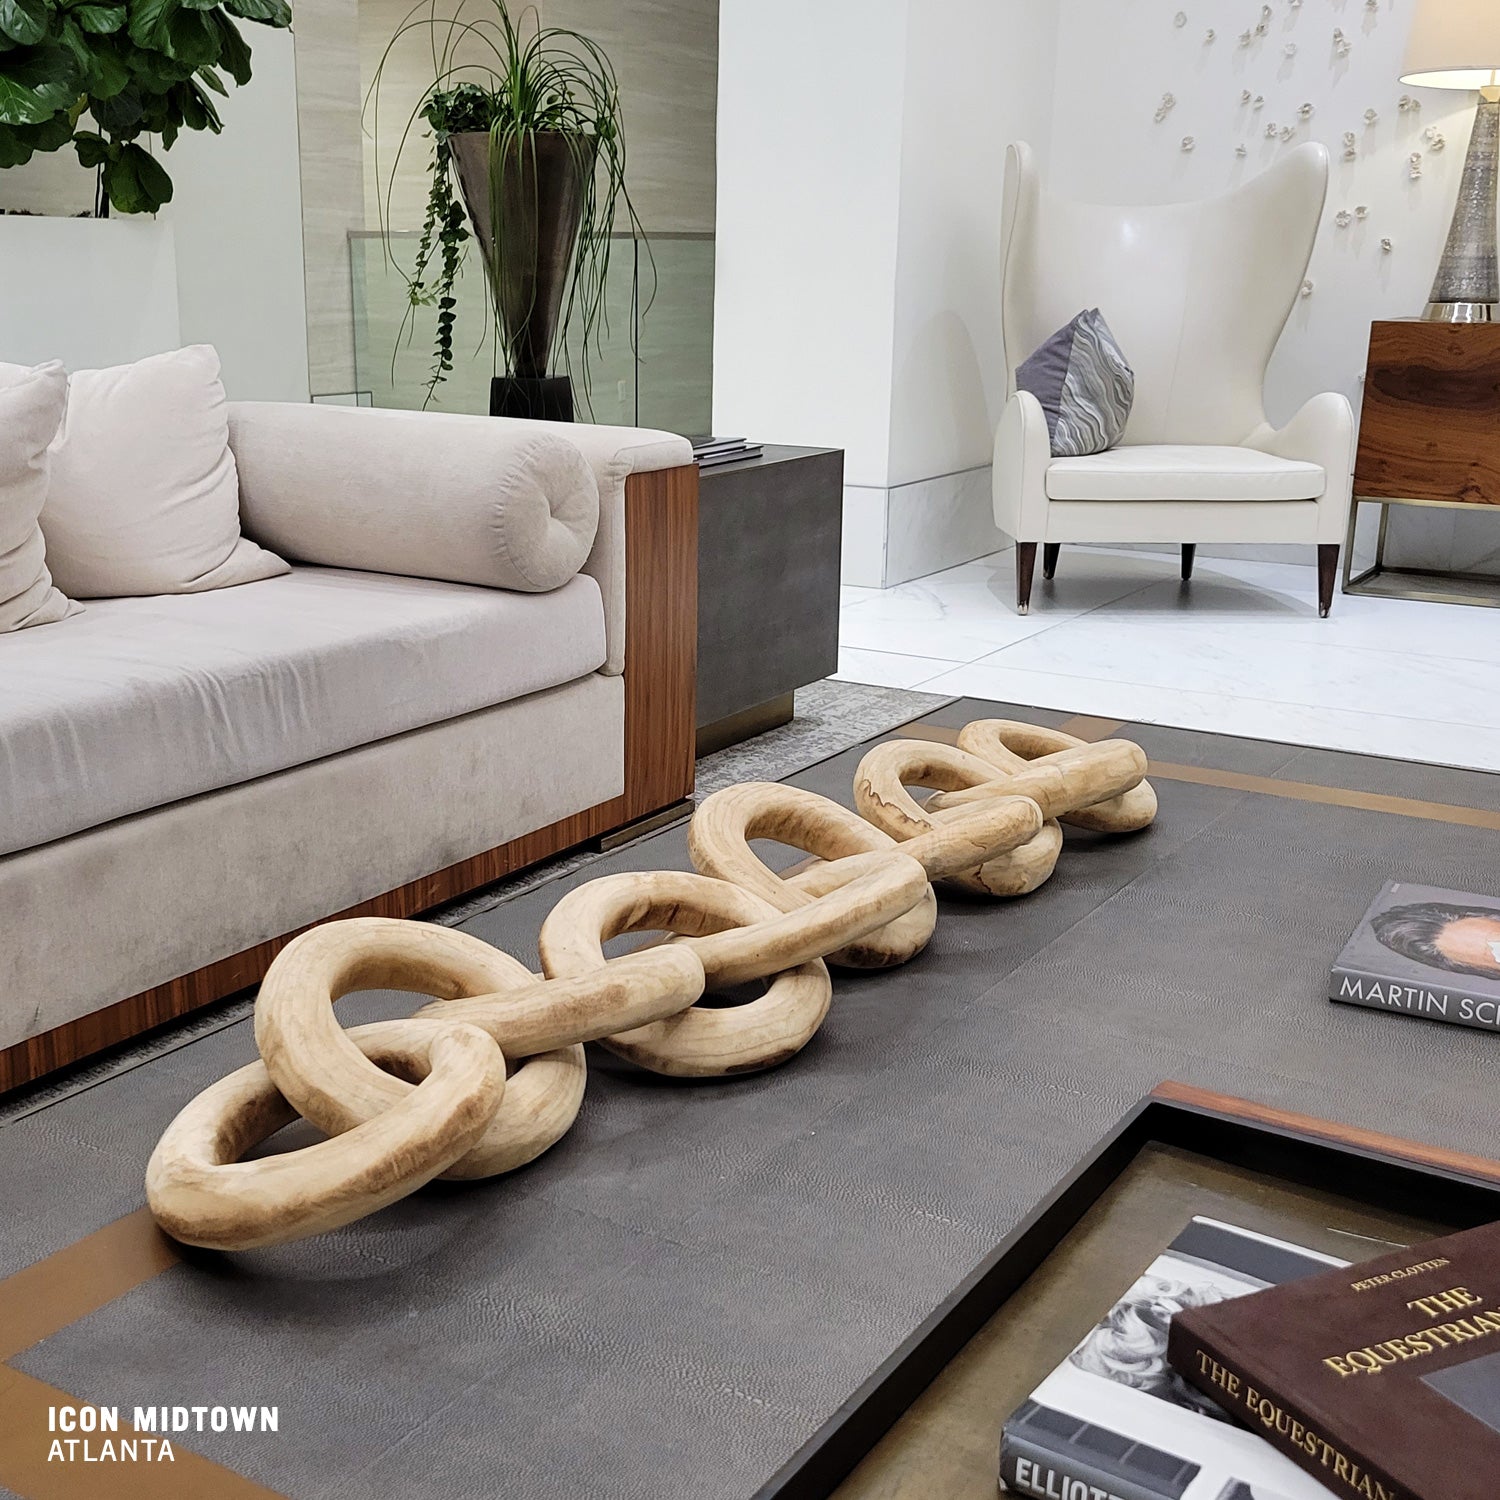 Large Wood Chain on coffee table in luxury apartment lobby.